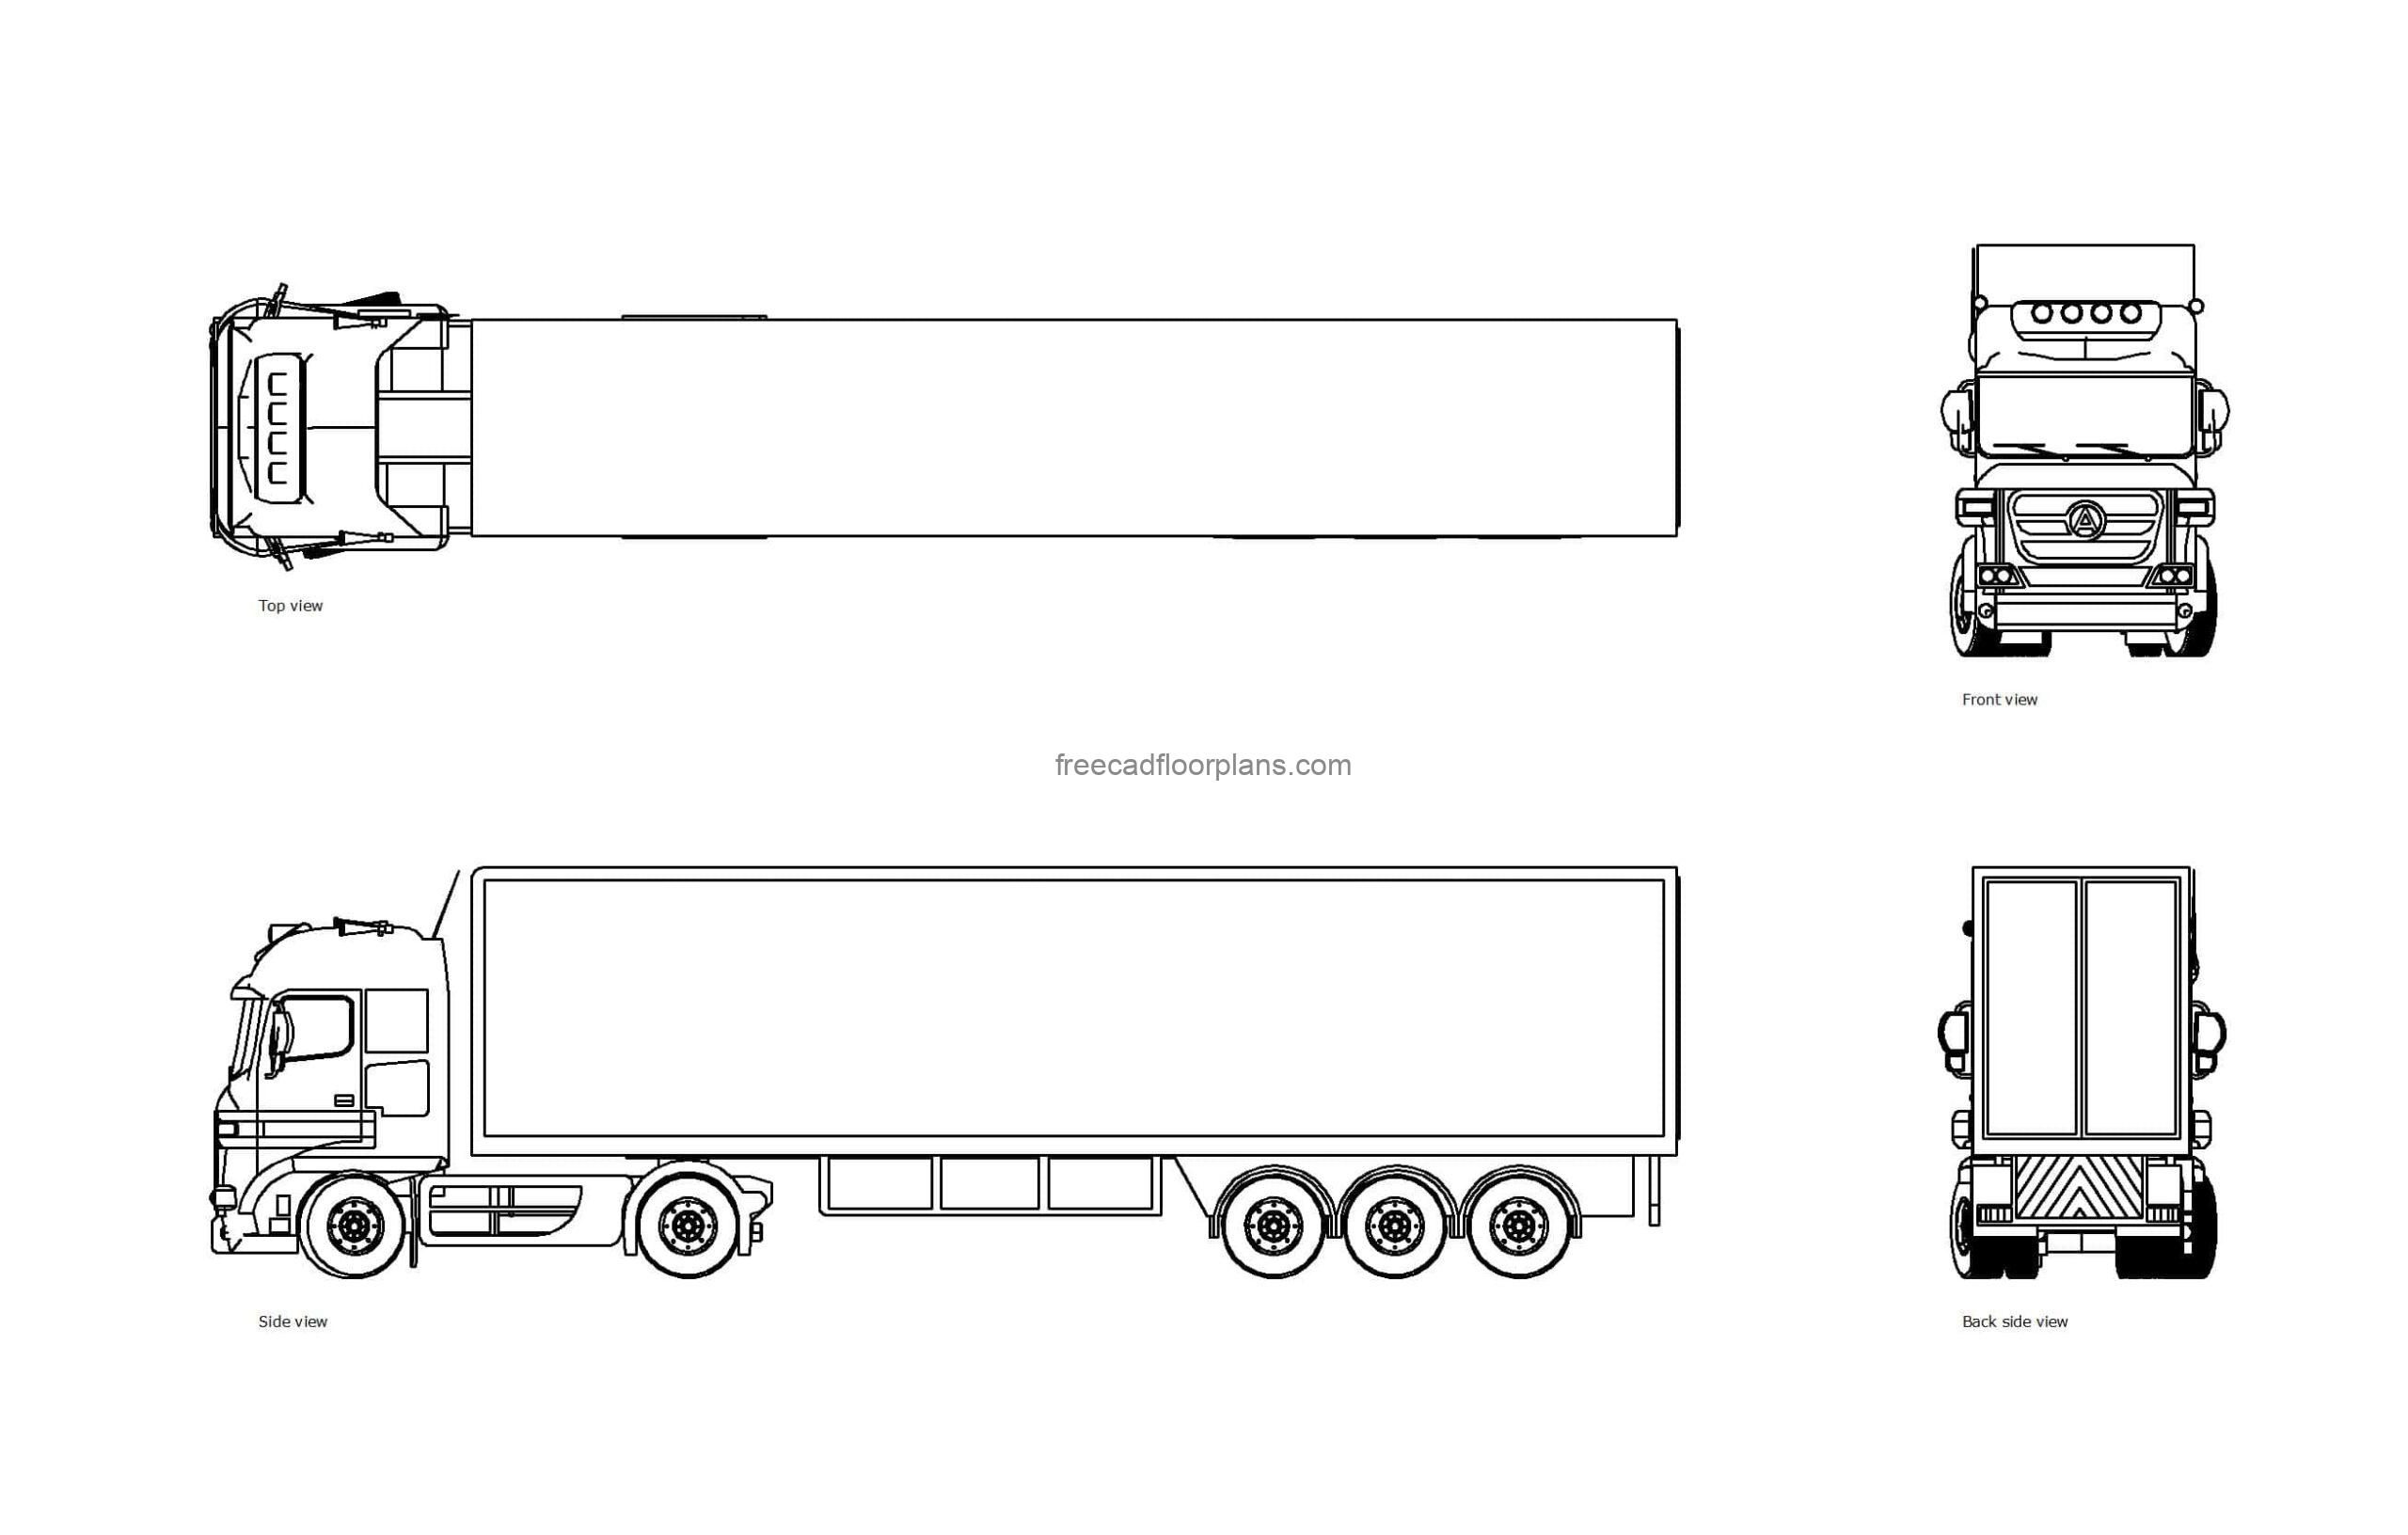 autocad drawing of an articulated lorry, 2d views, top, fron and side elevation, dwg file for free download